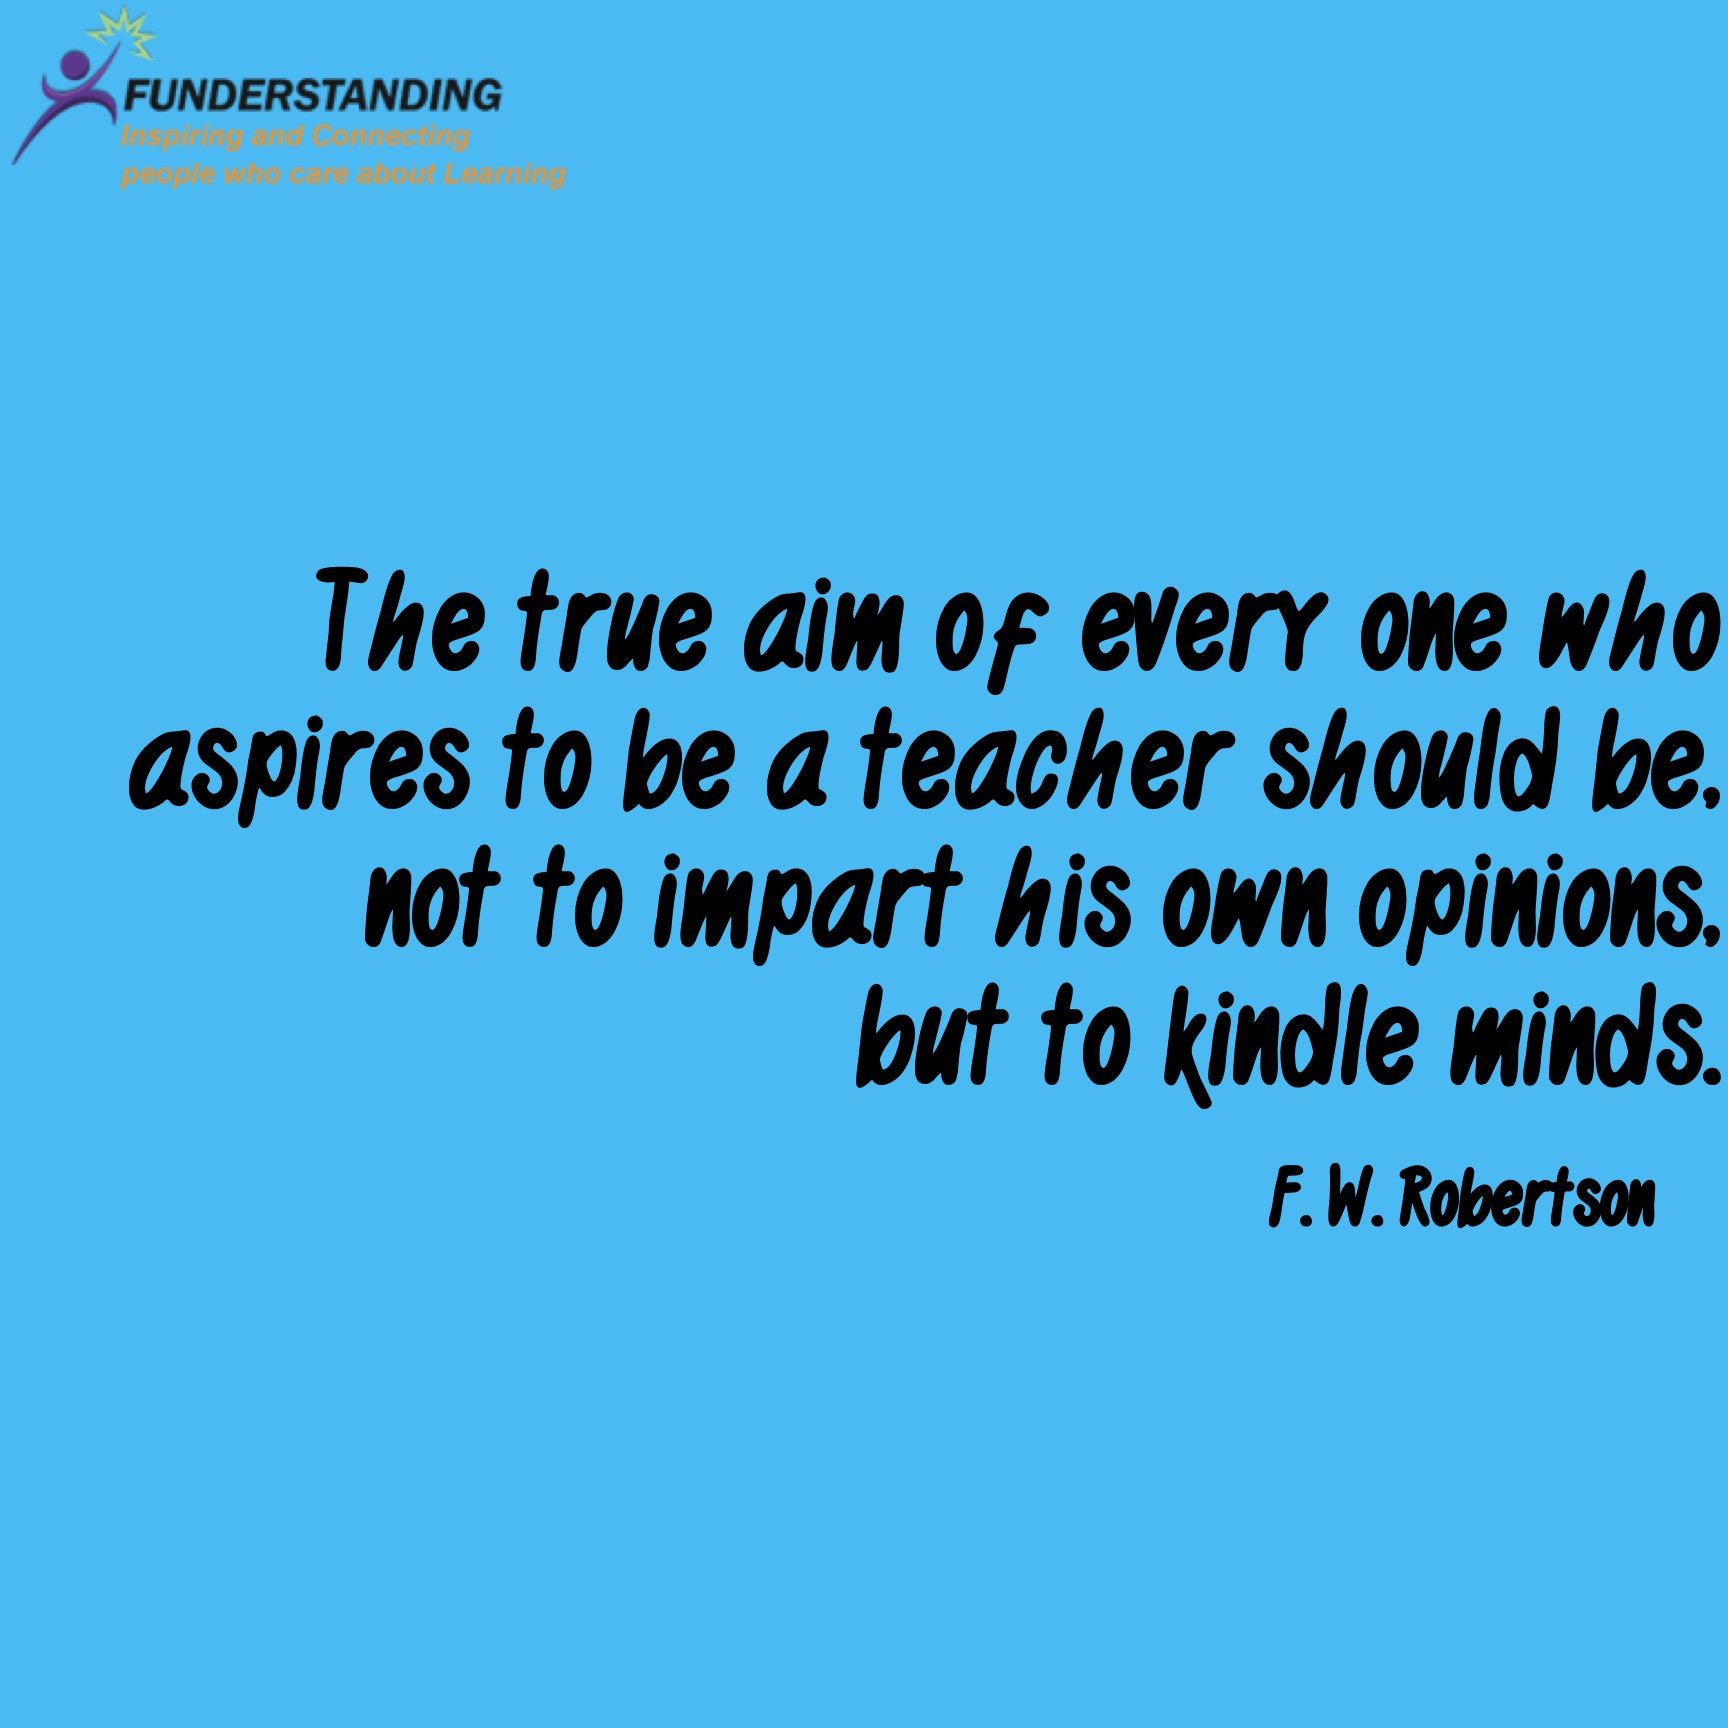 Quotes About Special Education
 Quotes Related To Special Education QuotesGram